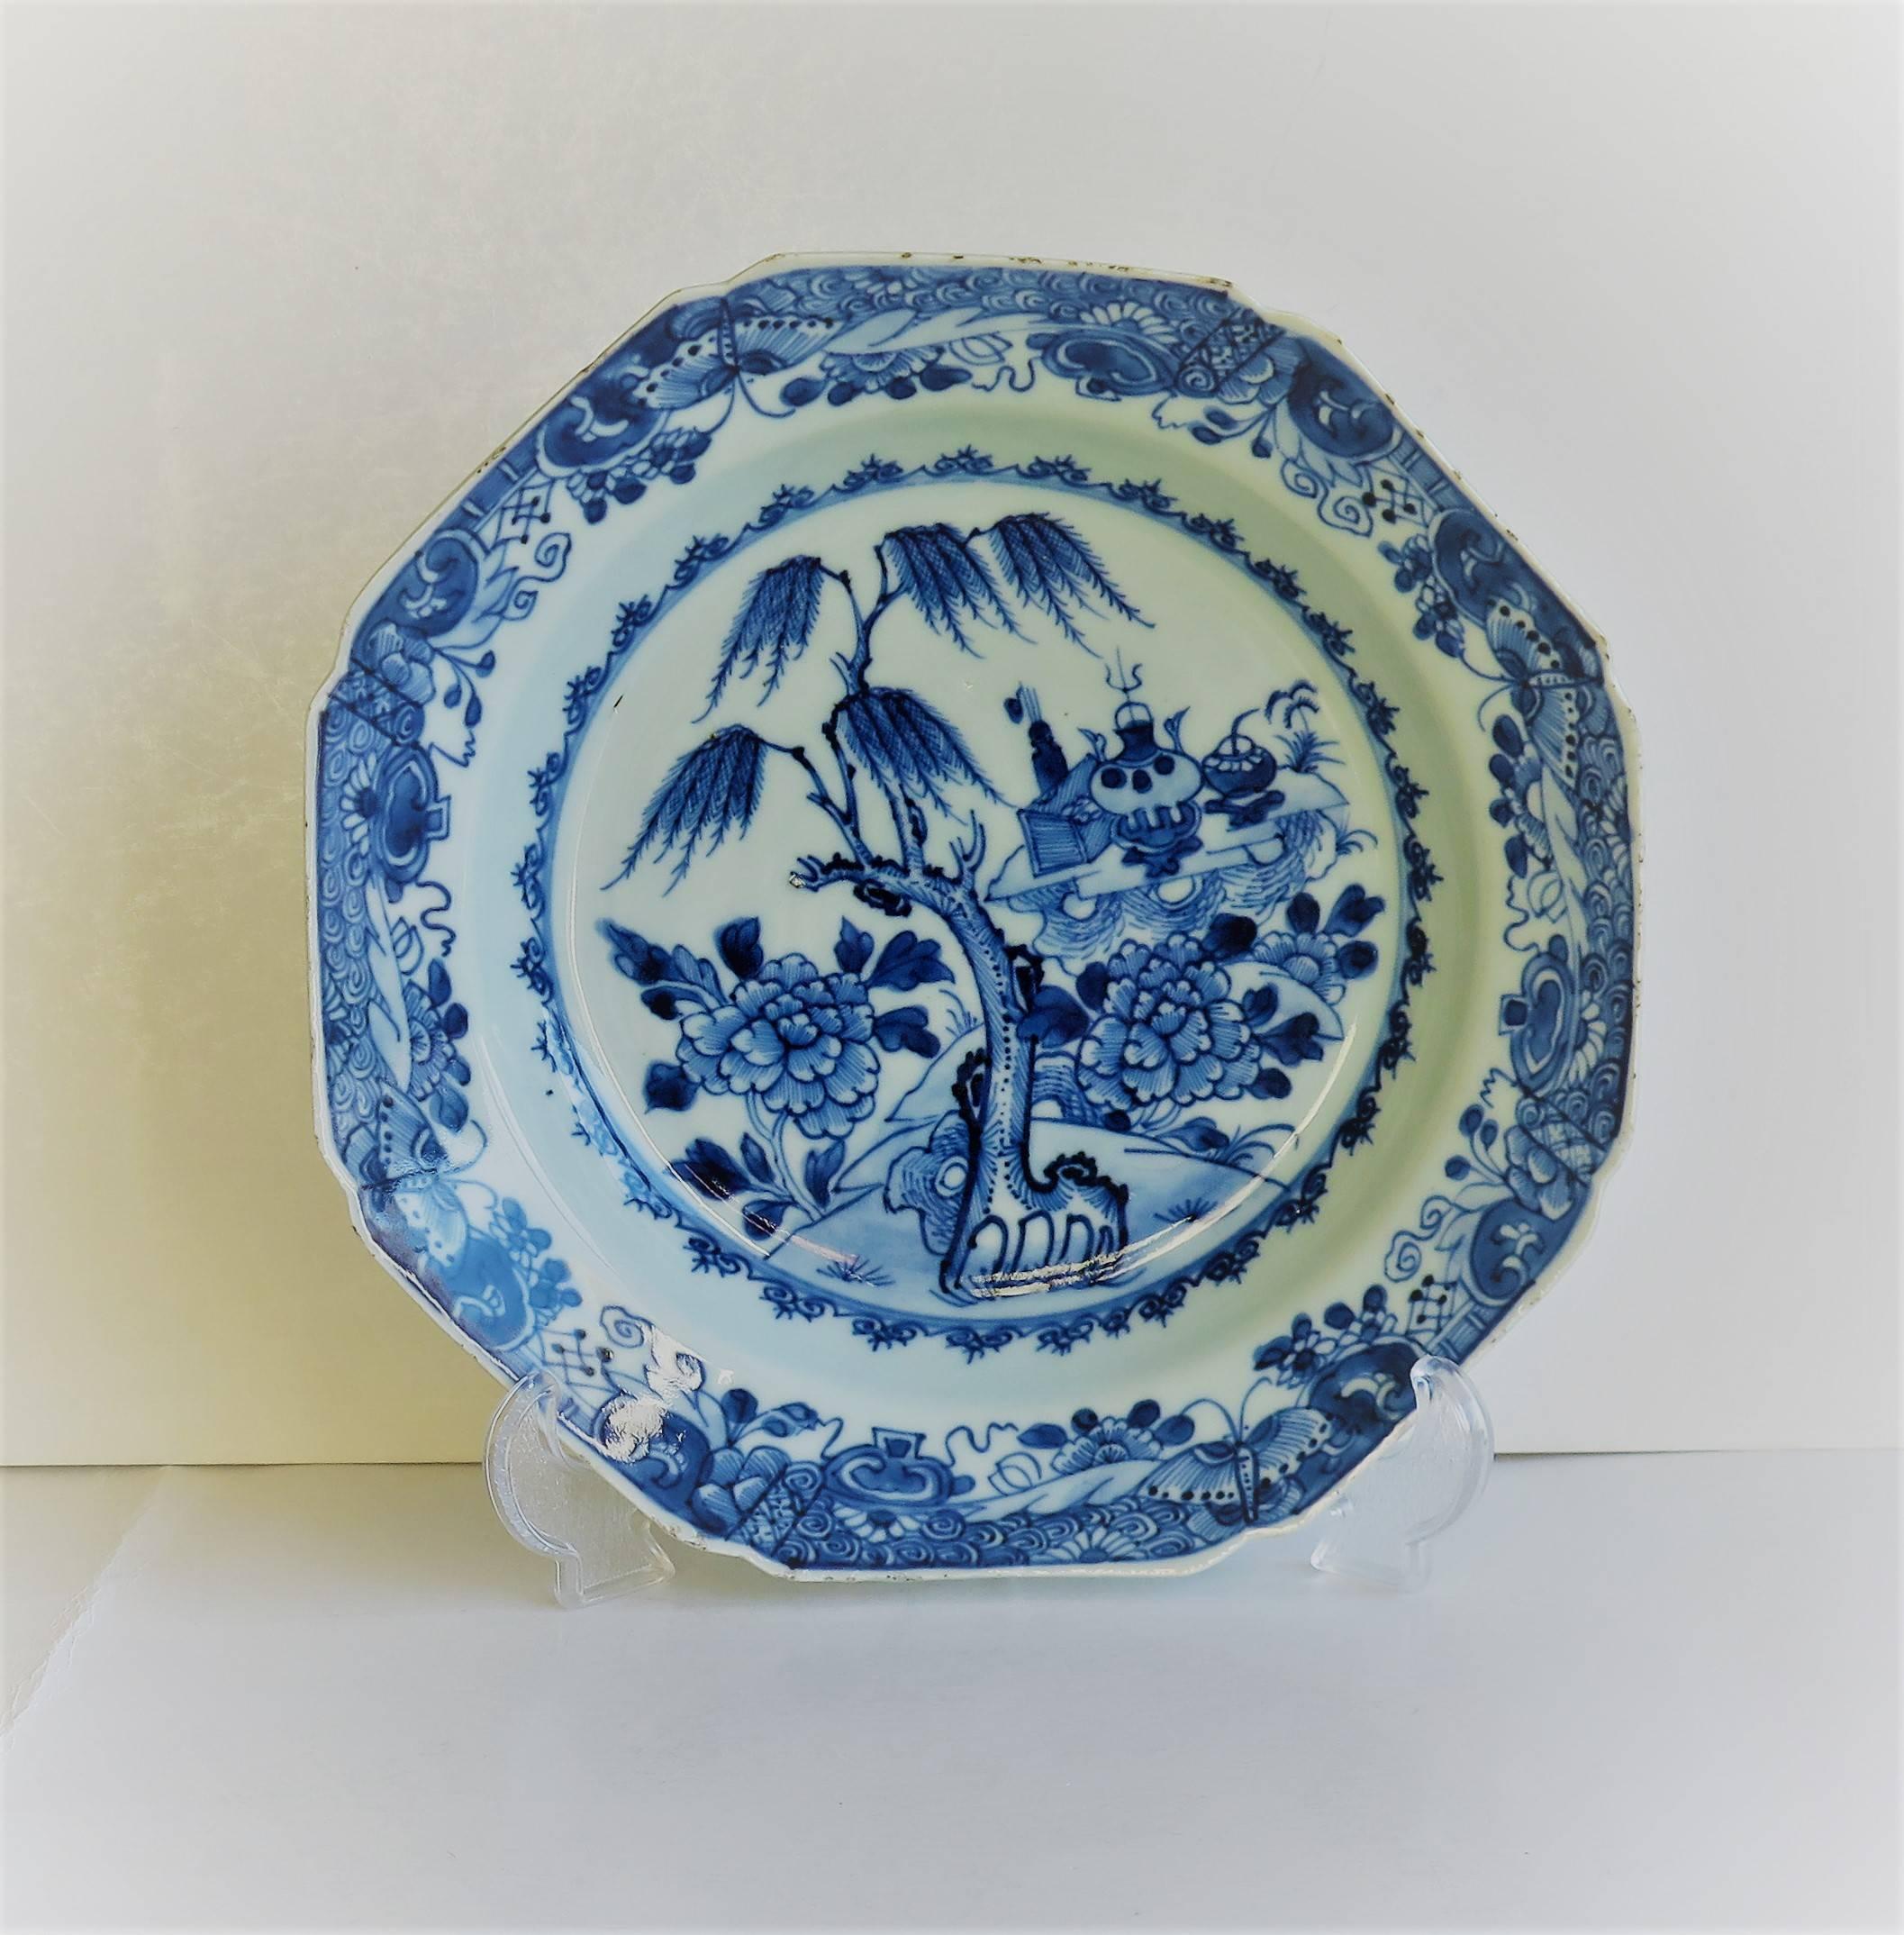 18th Century Chinese Export Soup Plate, Canton, Blue and White Porcelain, Qing, circa 1780